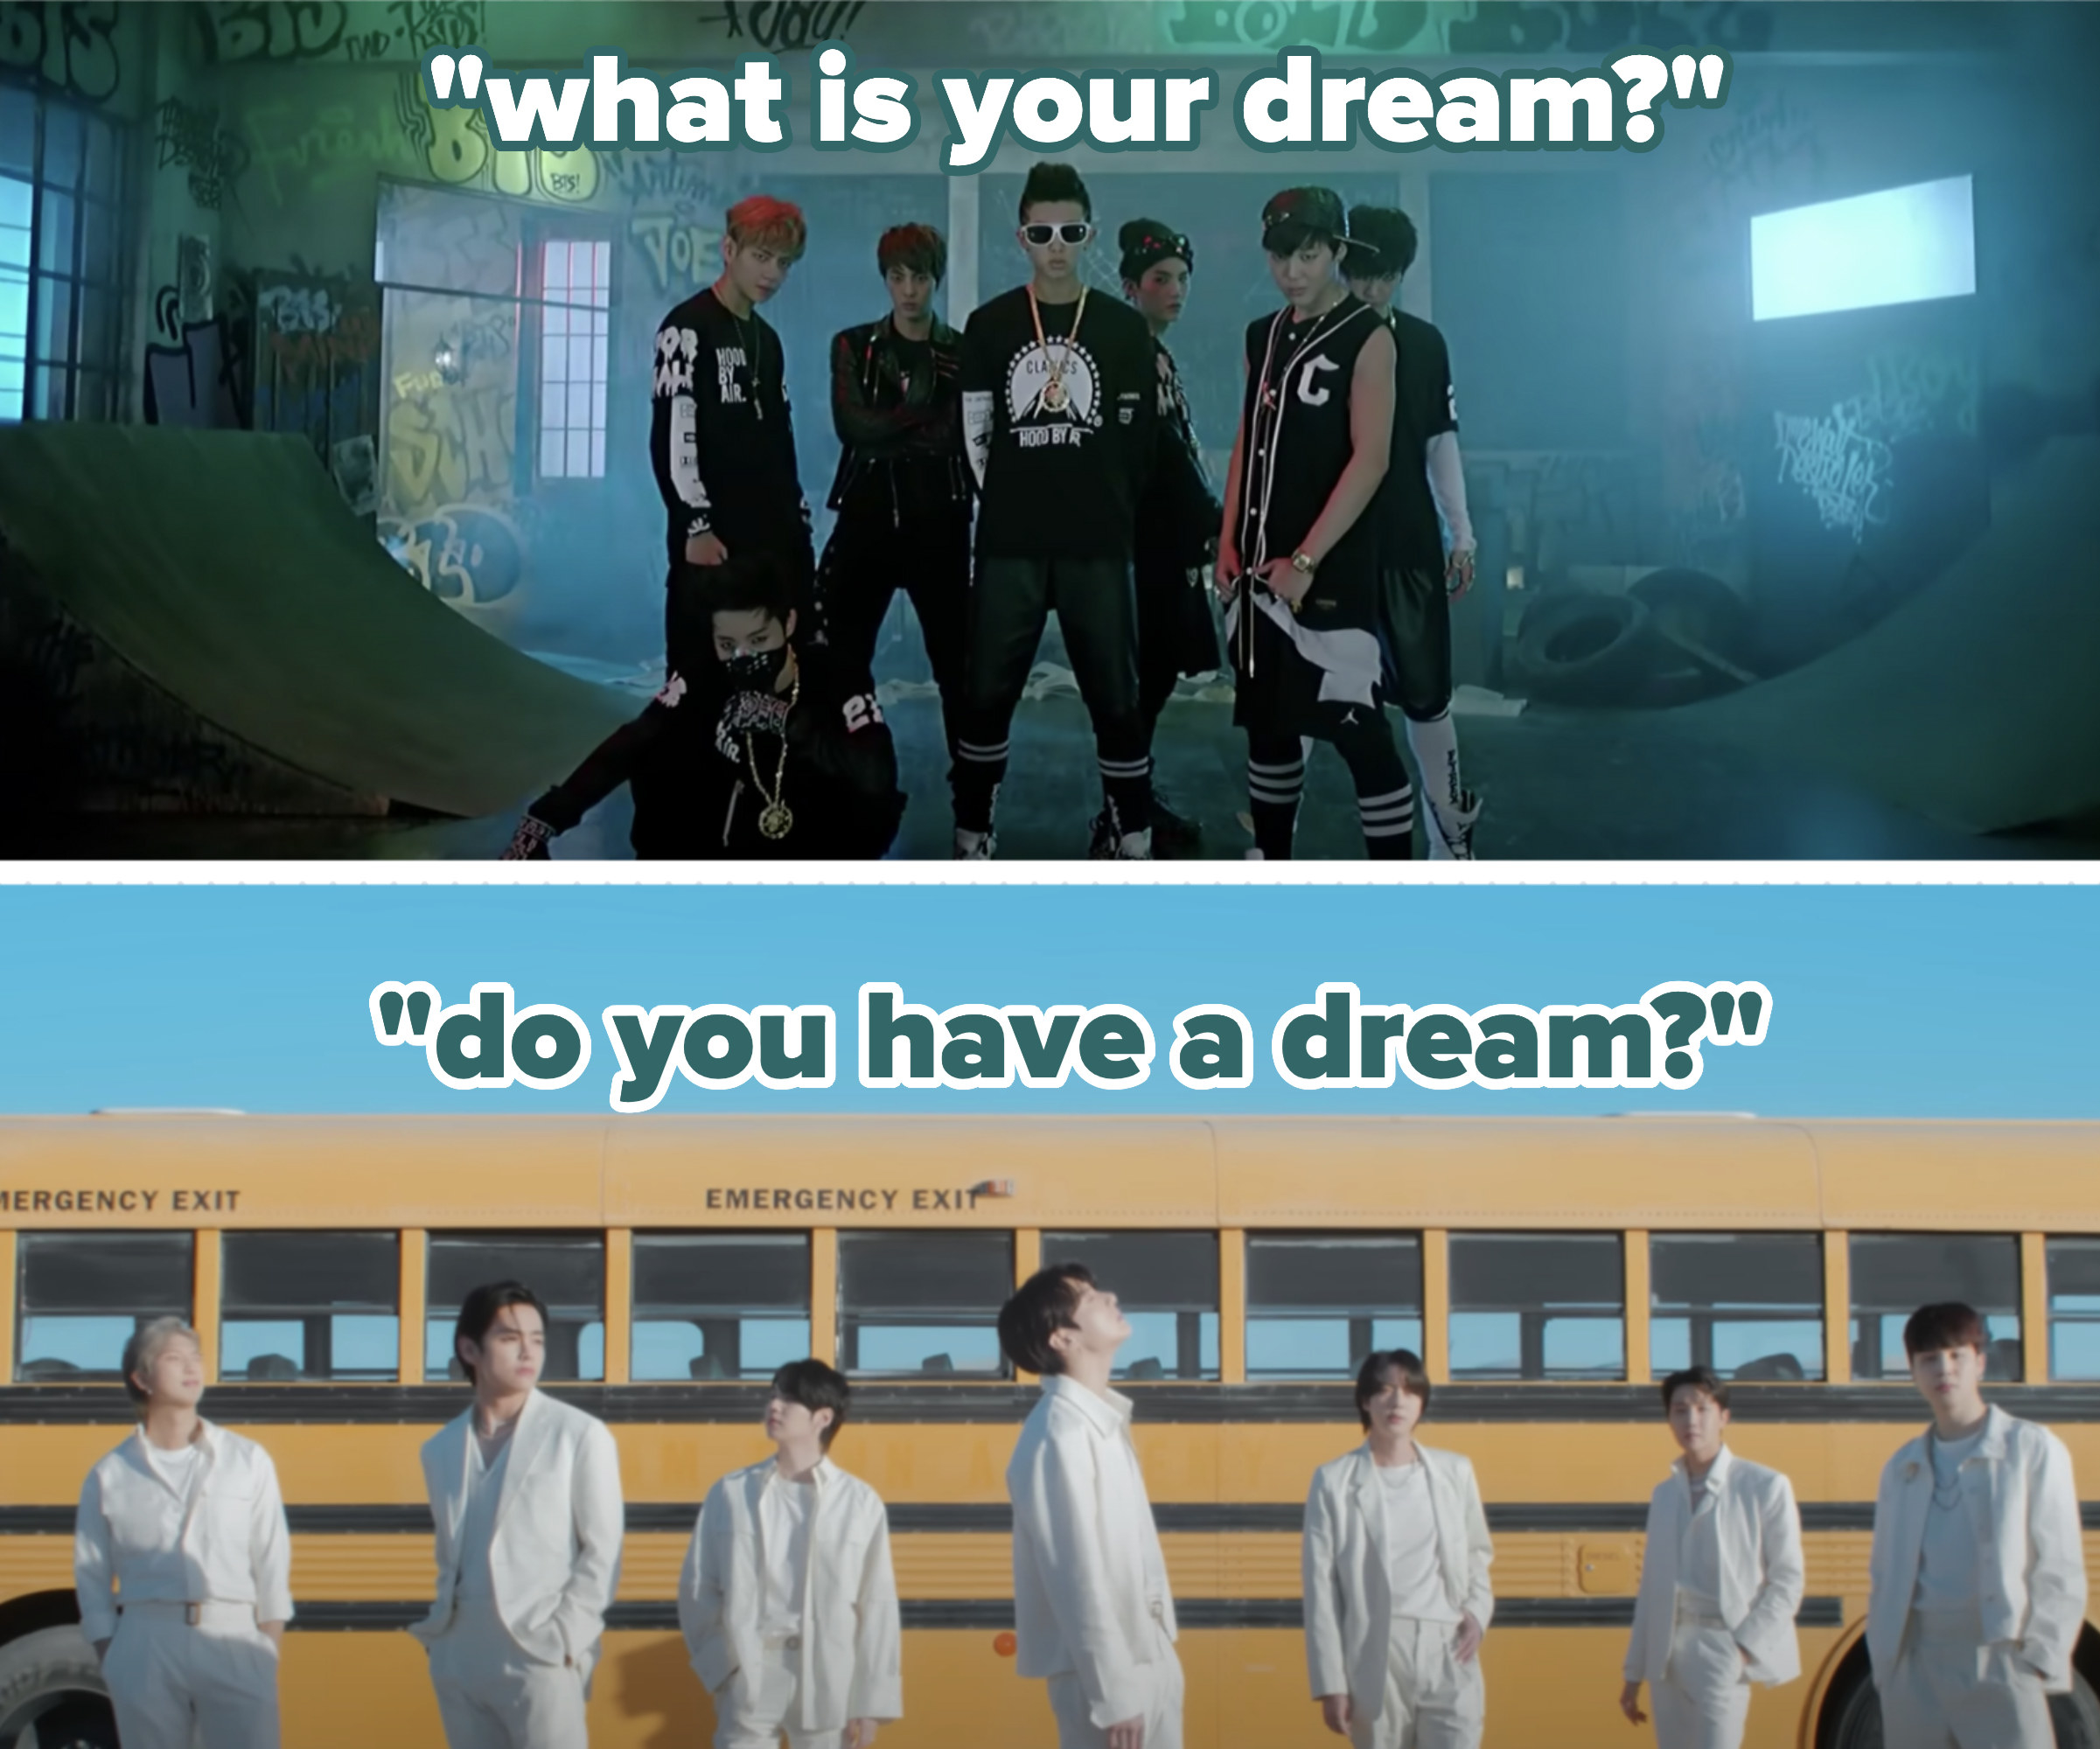 top an image of bts from the no more dream video. on bottom an image of bts in the yet to come video.